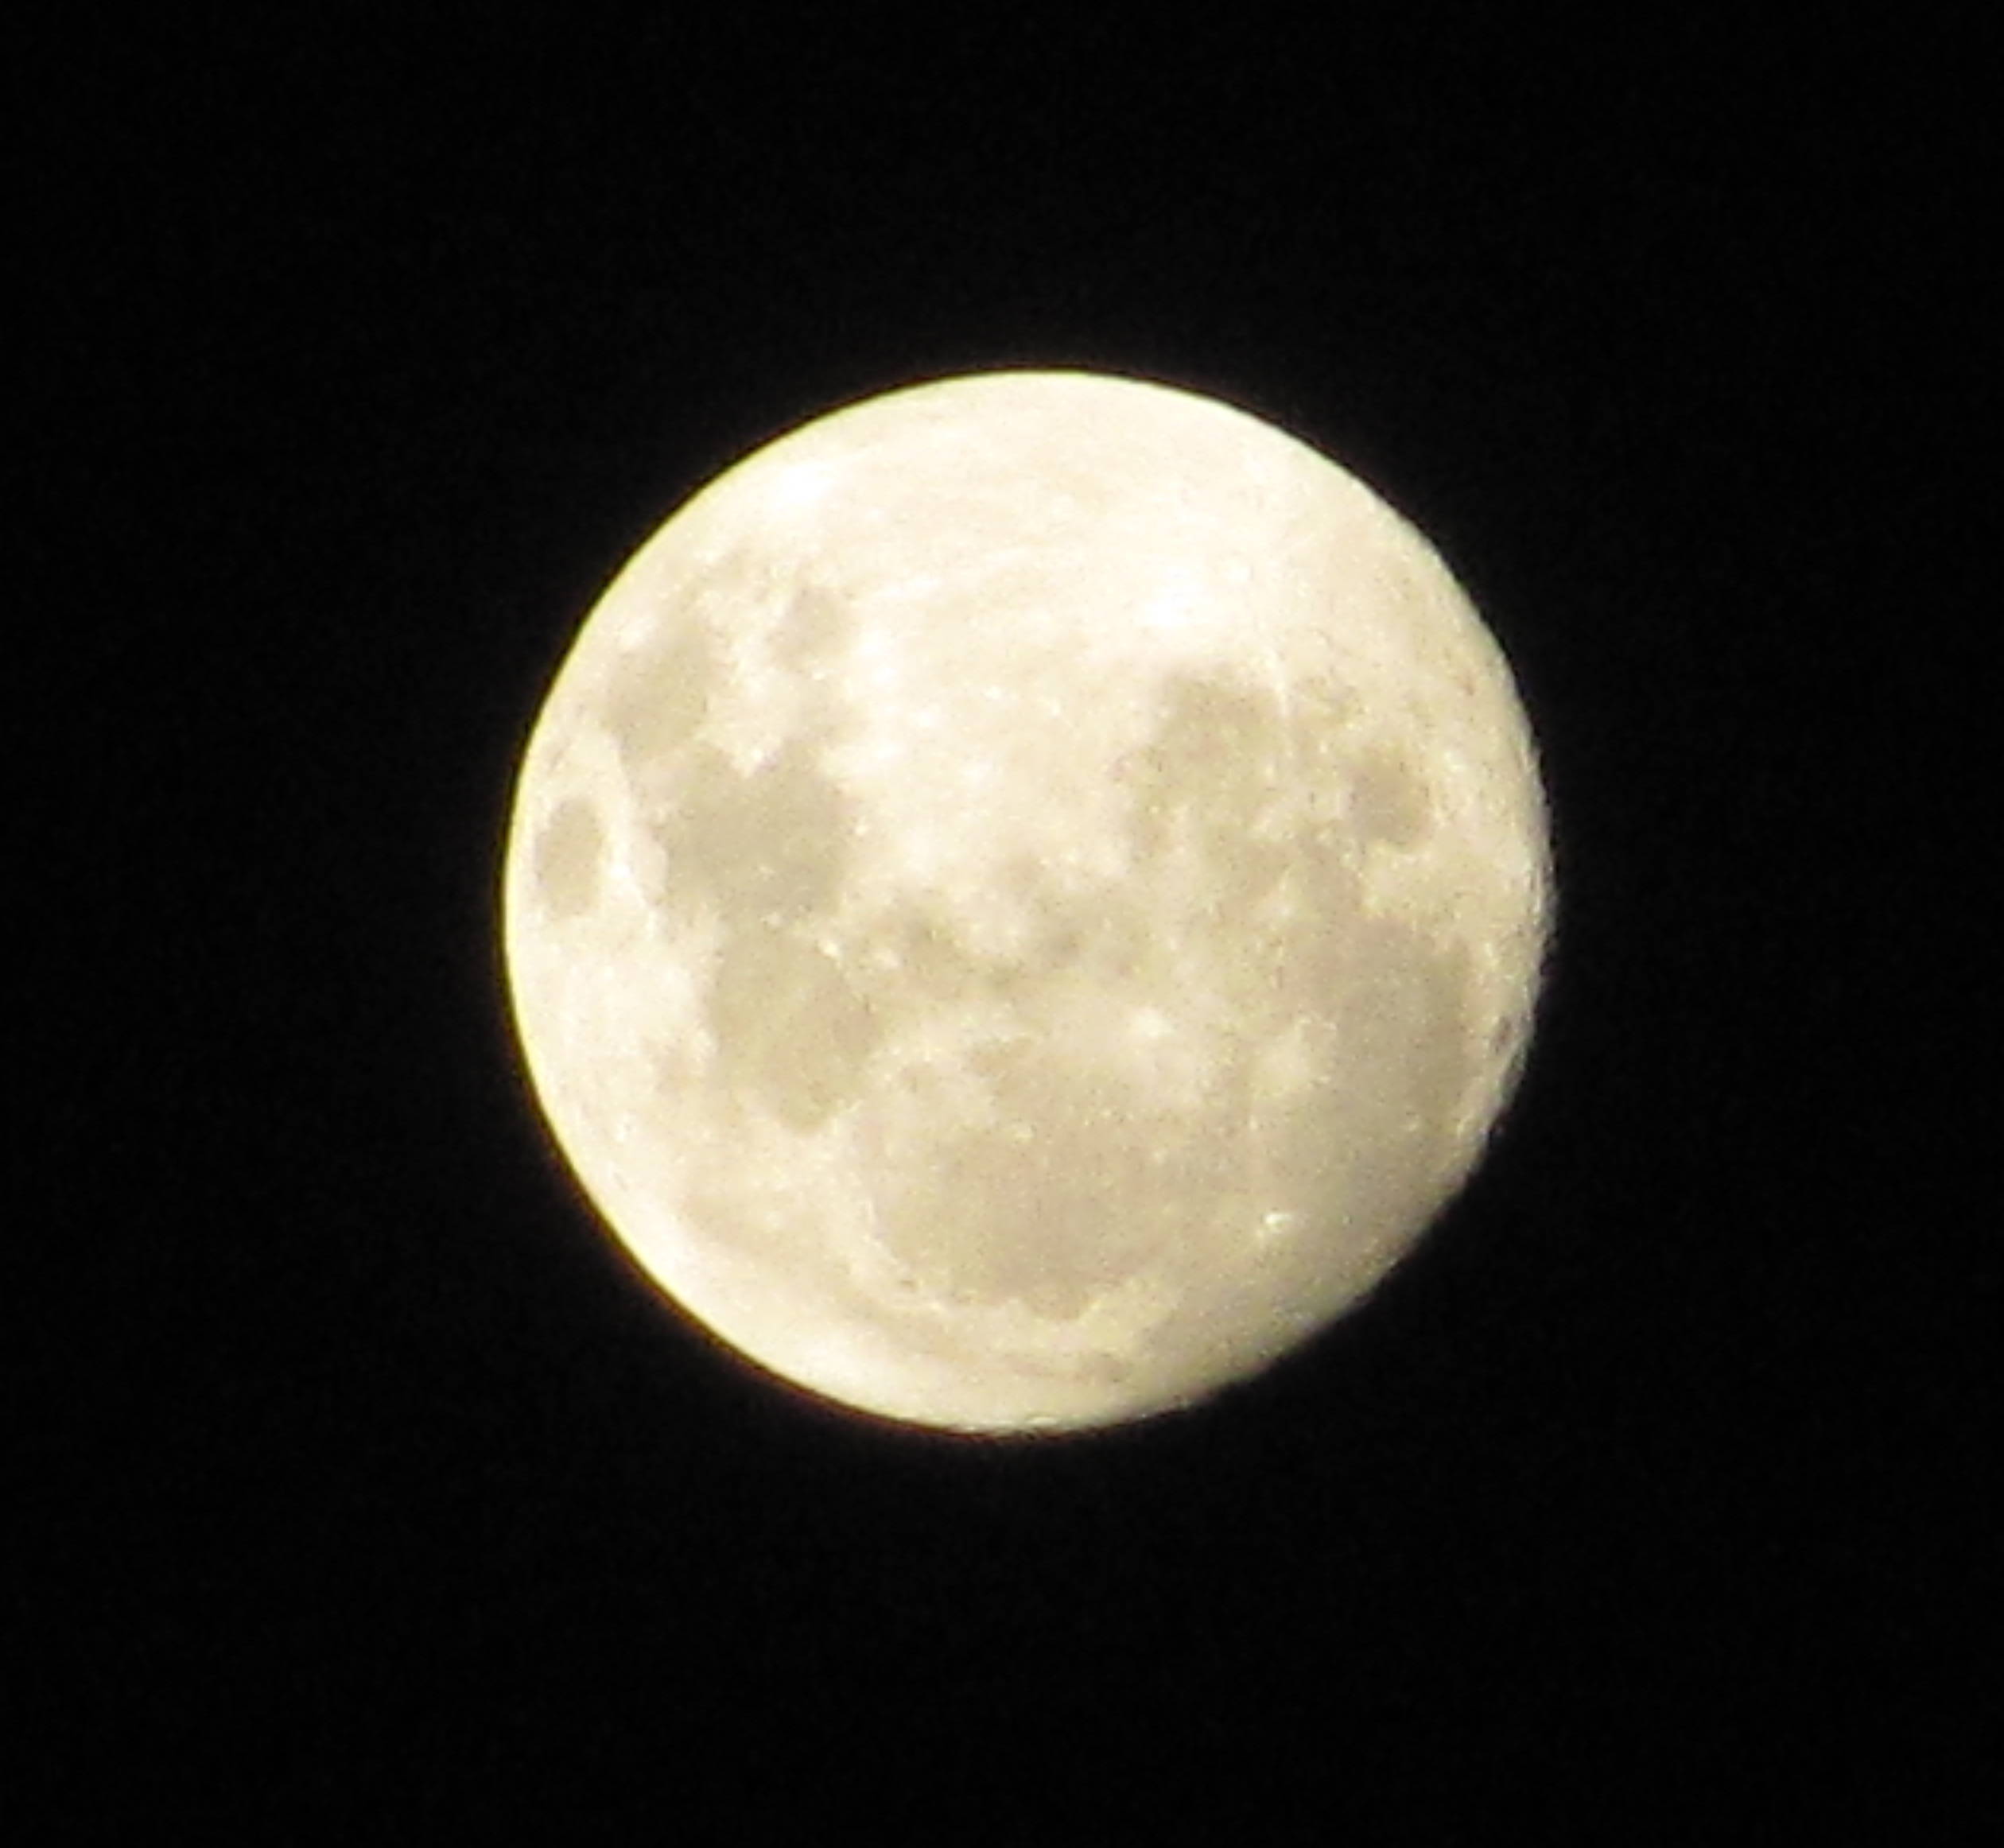 The almost full moon in April 2014